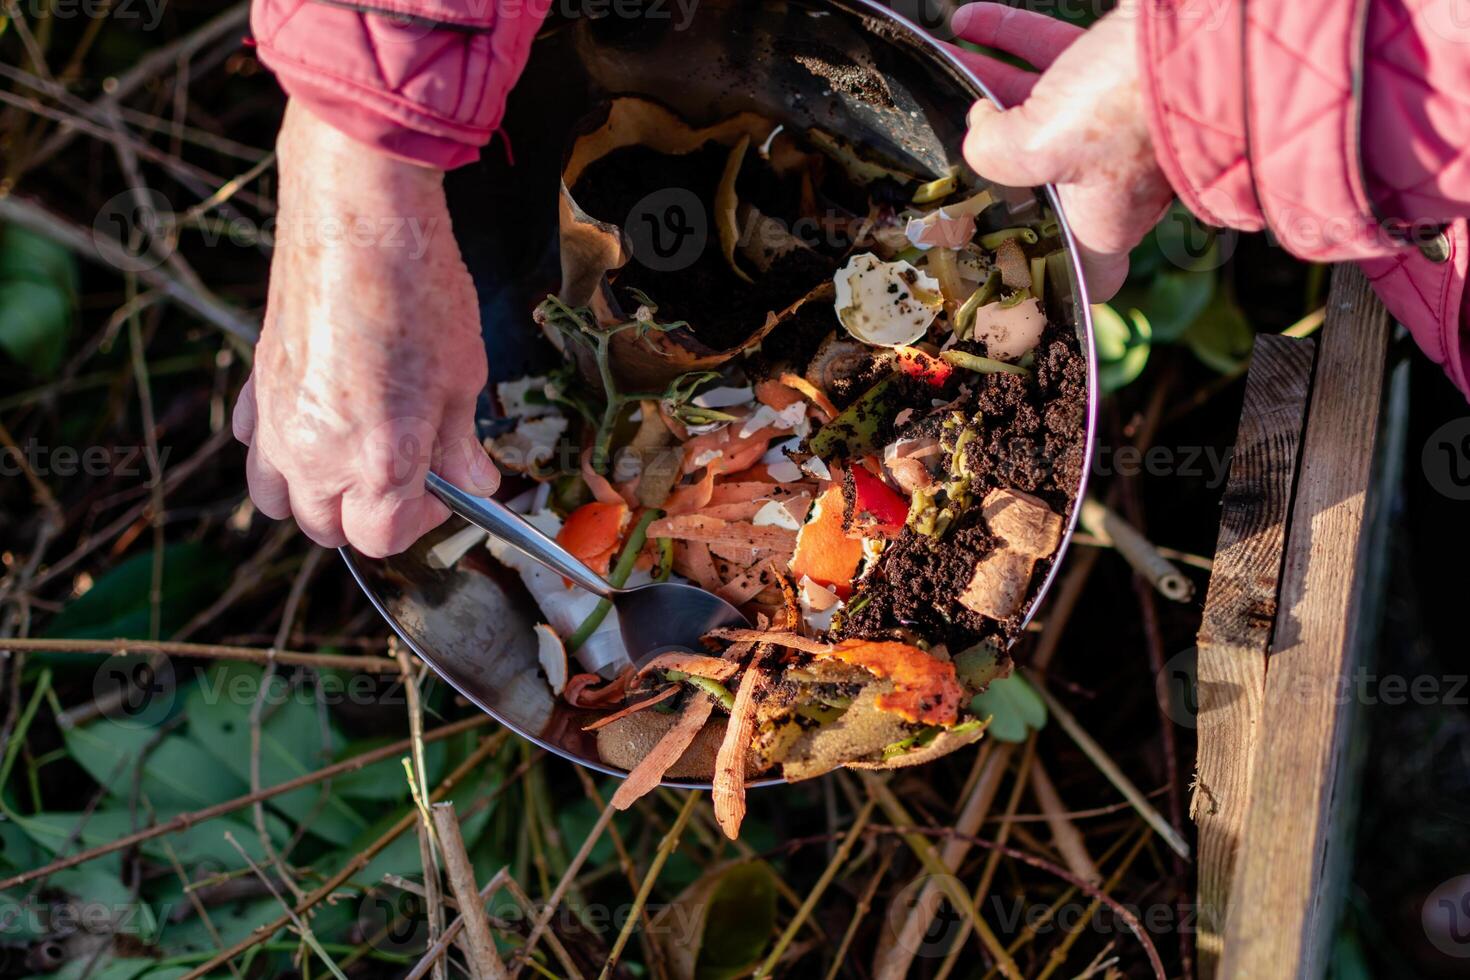 Person who put in a composter some kitchen waste like vegetables, fruits, eggshell, coffee grounds in order to sort and make bio fertilizer photo